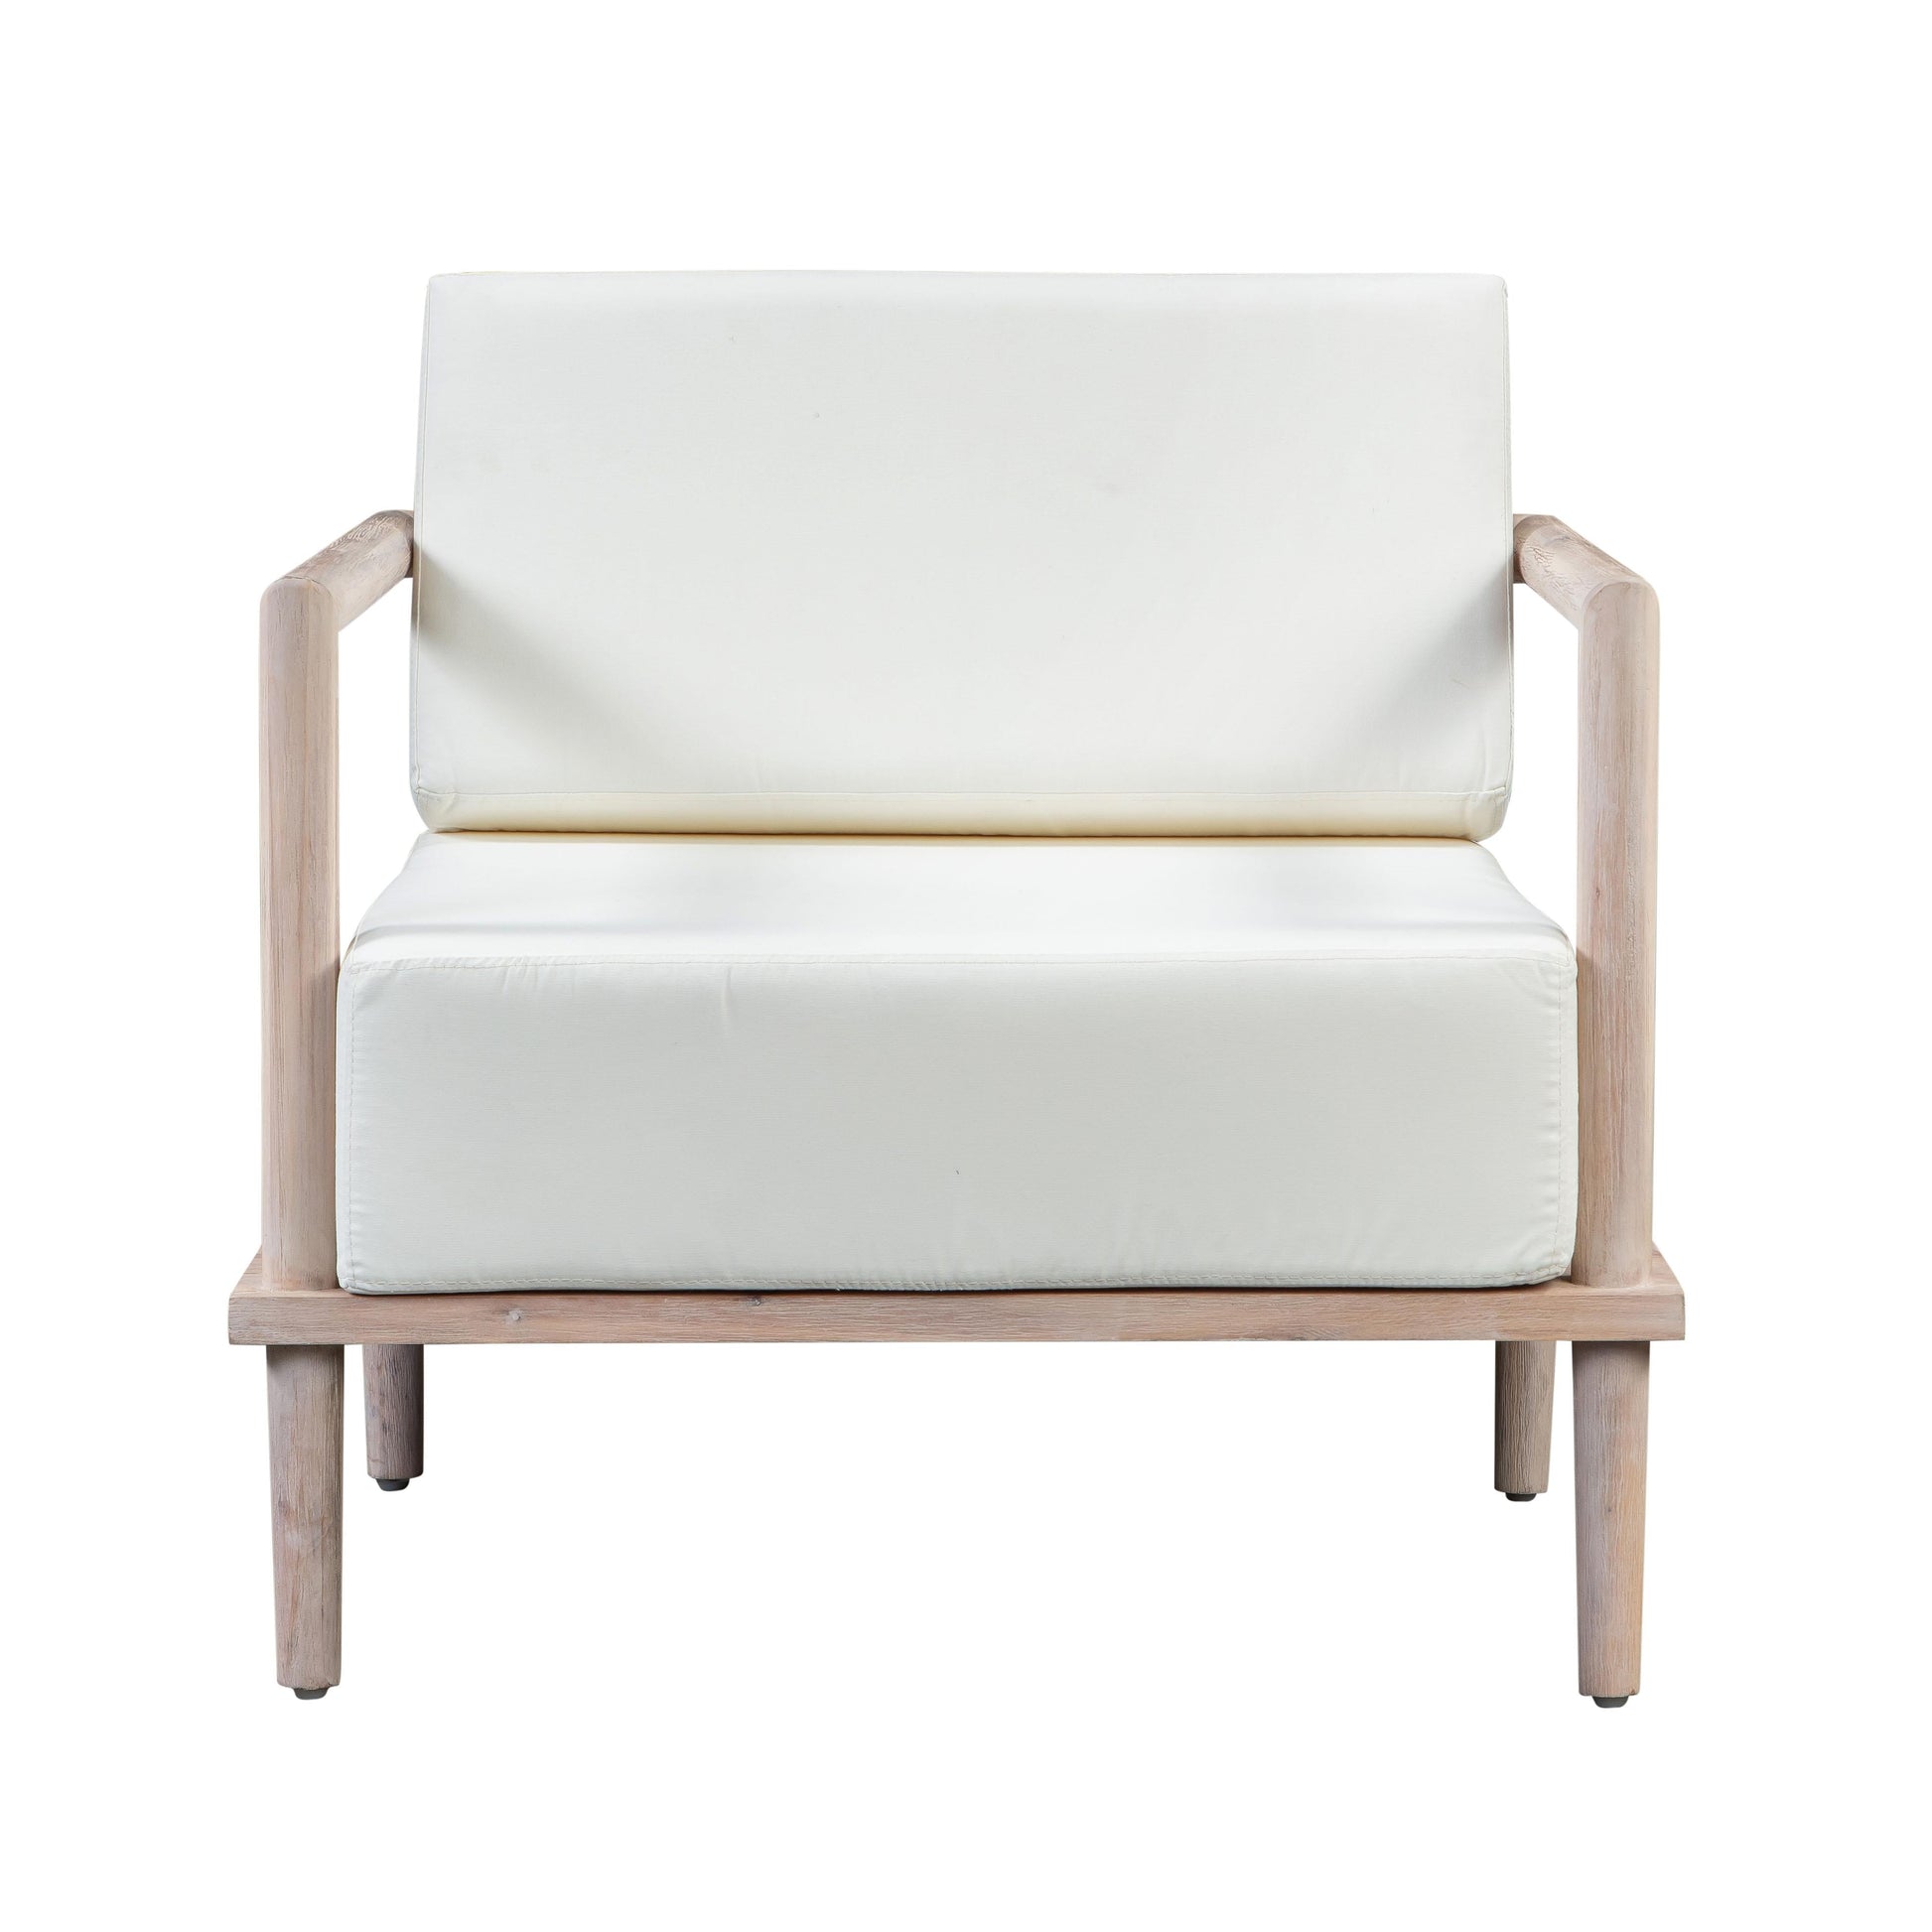 Emerson Cream Outdoor Lounge Chair by TOV